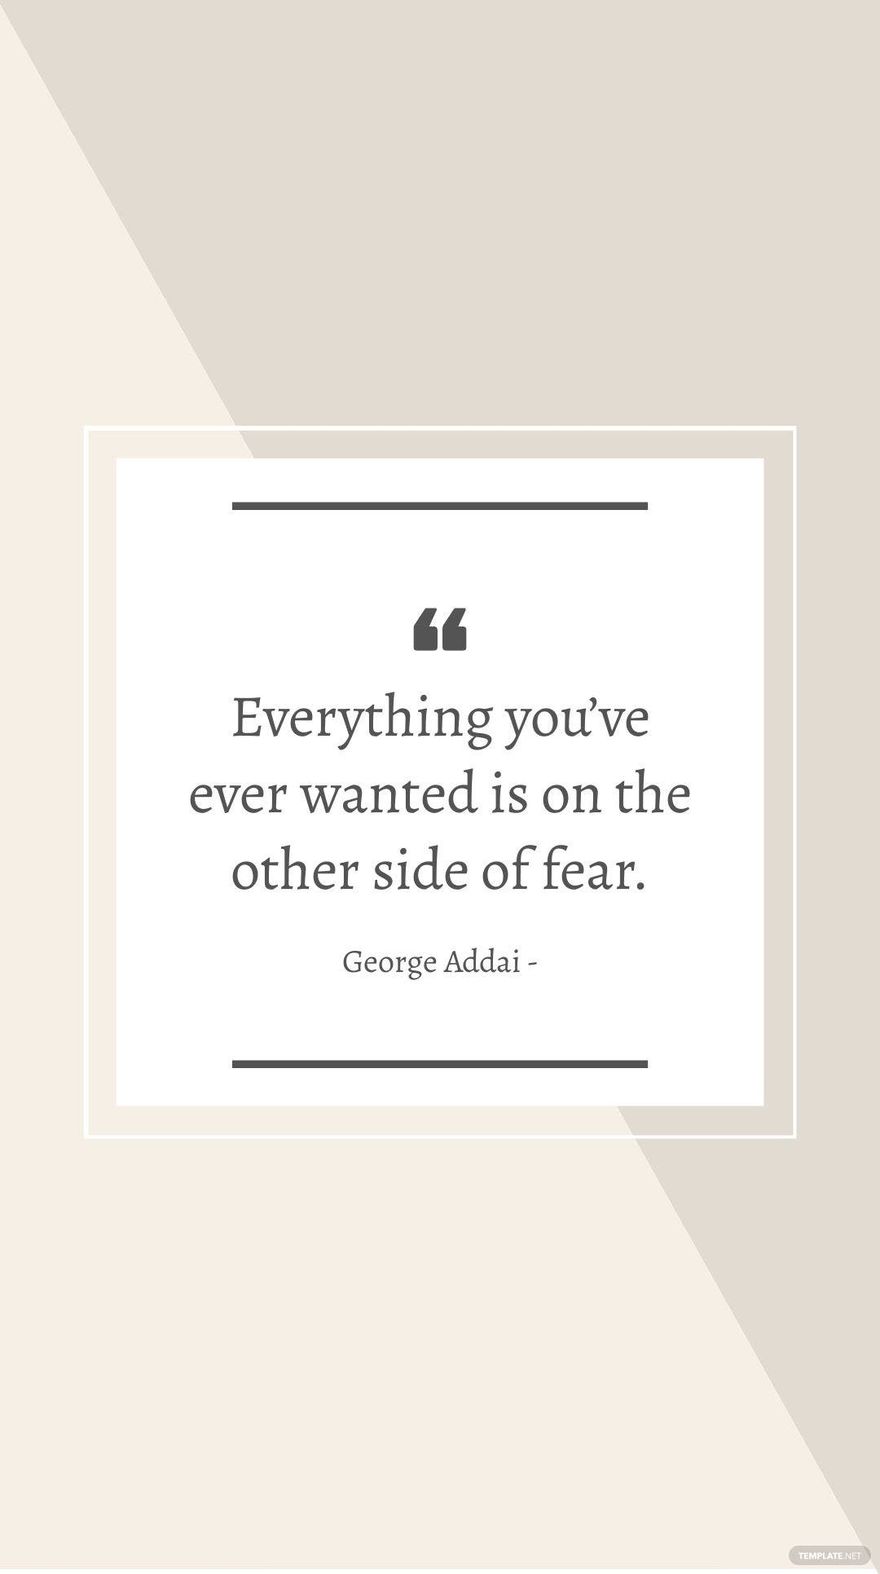 George Addai - Everything you’ve ever wanted is on the other side of fear.